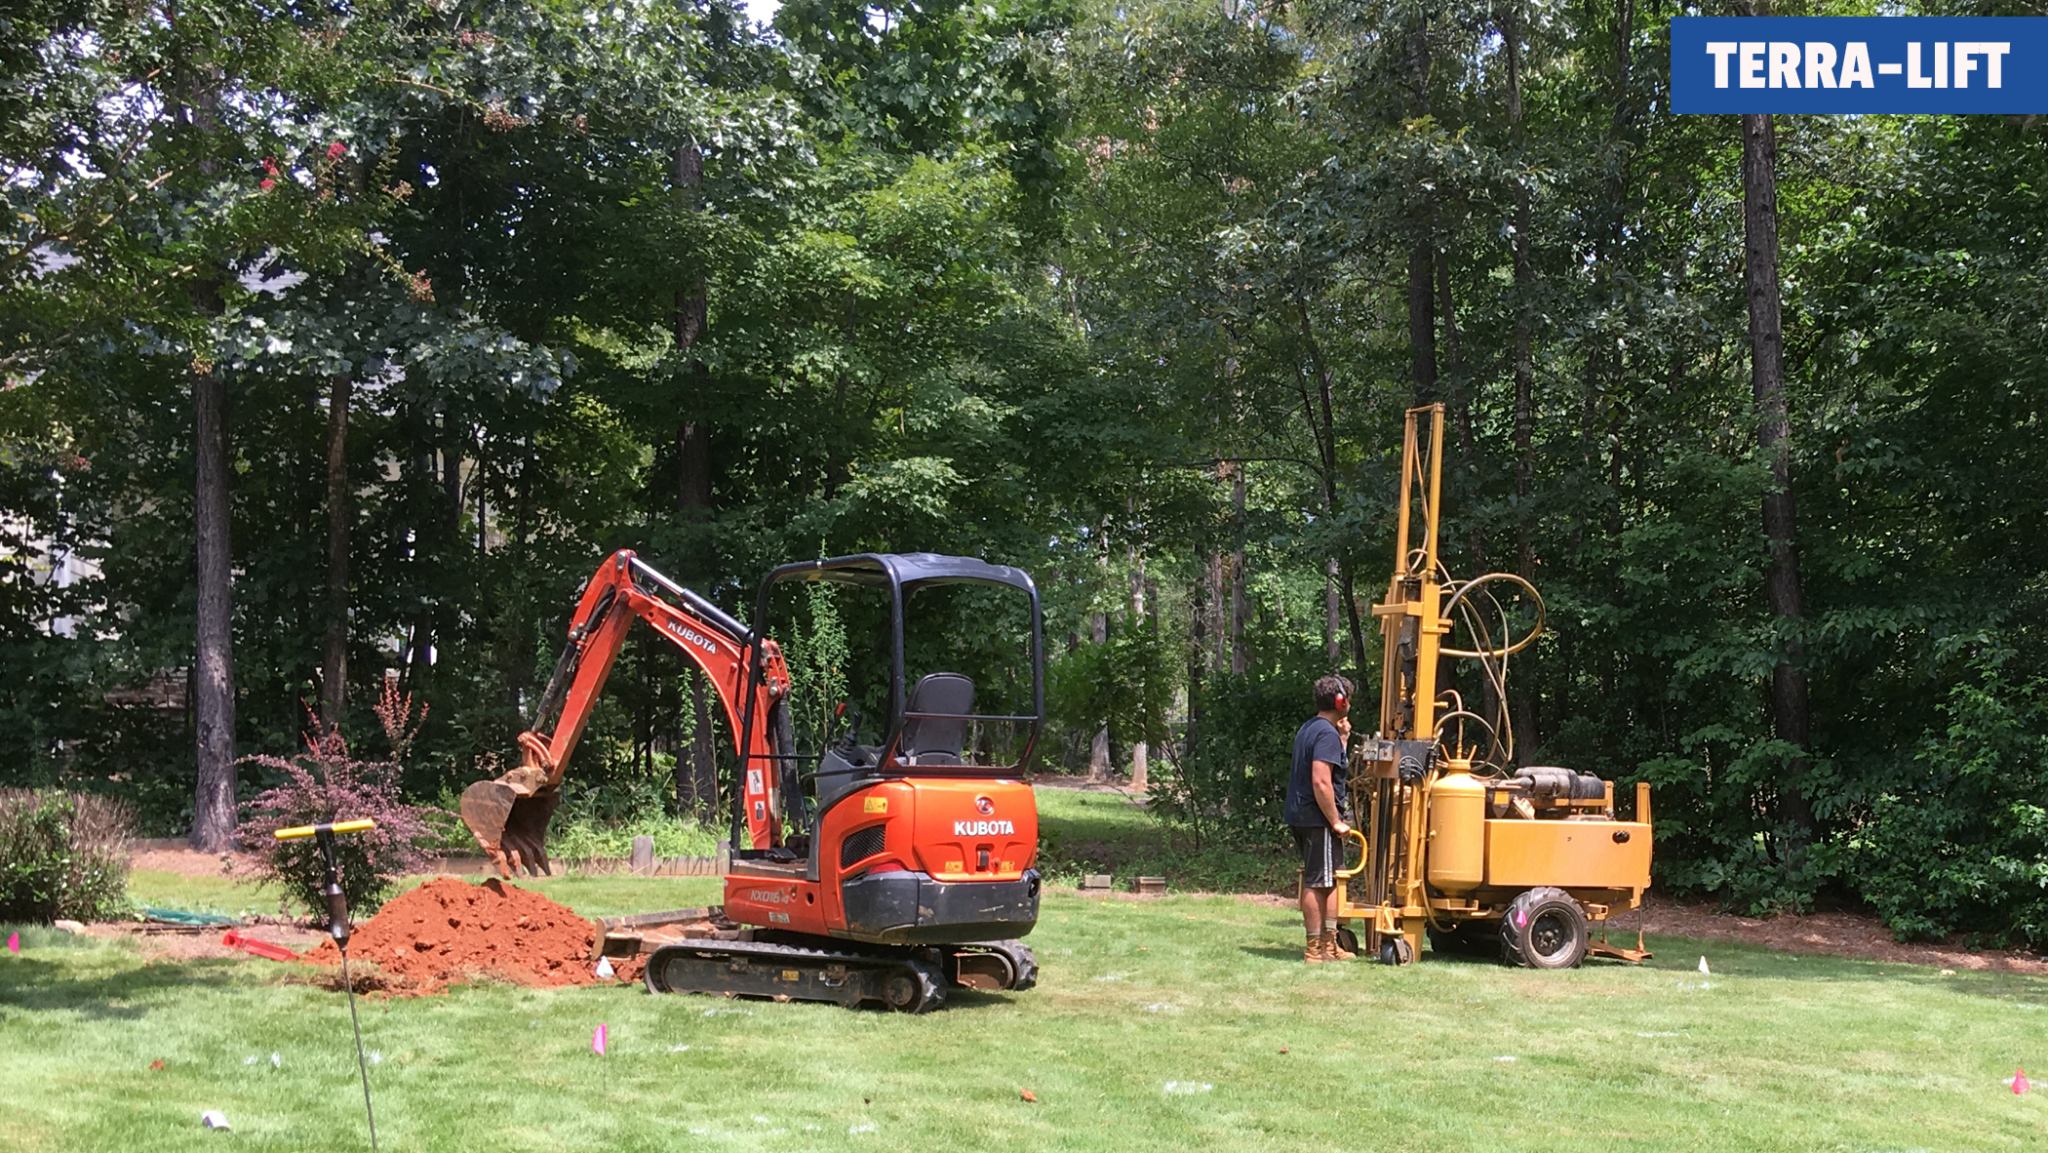 TW Ammons Septic - Watching the Terra-lift fracking the drain field next to our excavator.